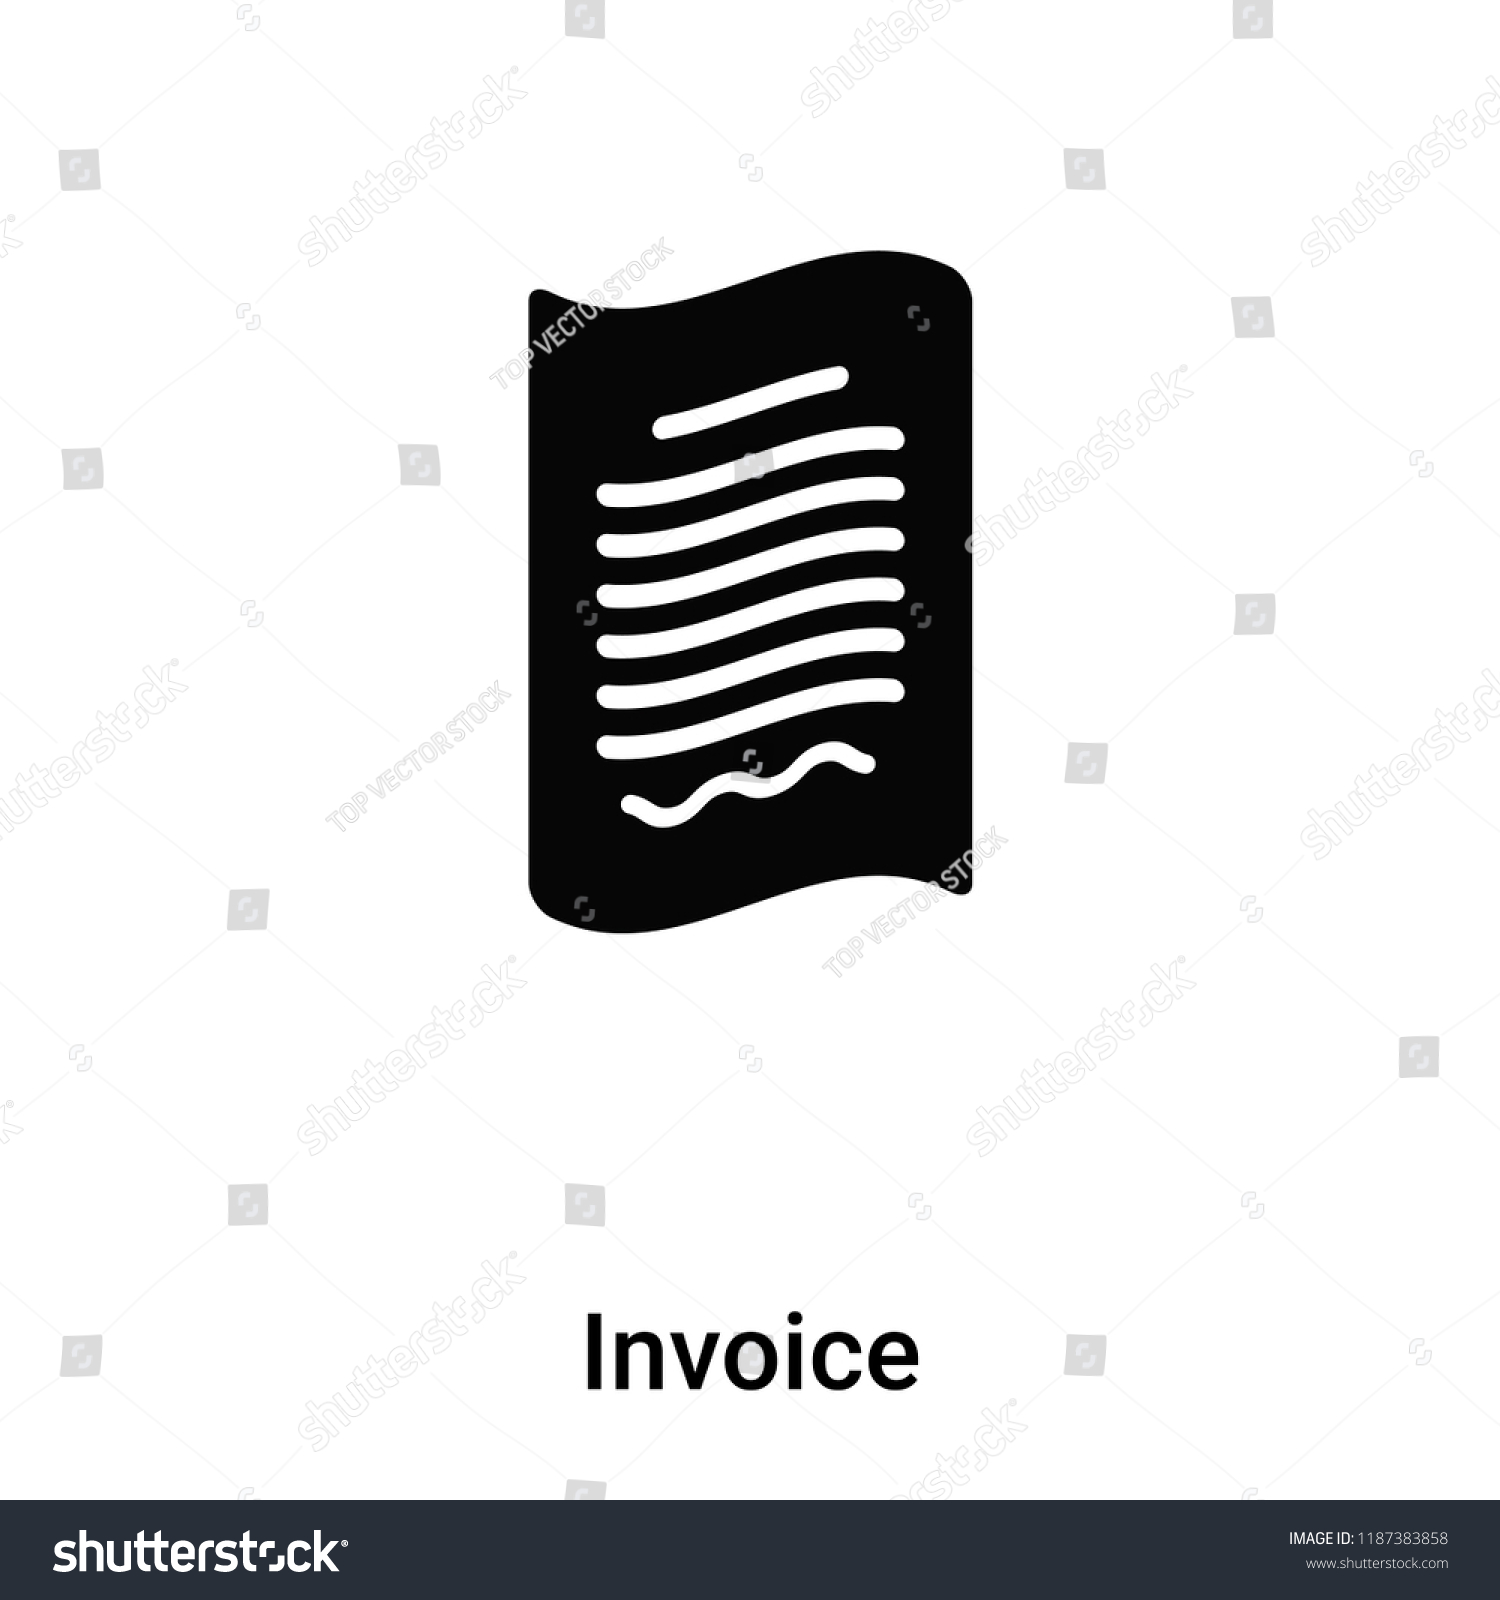 SVG of Invoice icon vector isolated on white background, logo concept of Invoice sign on transparent background, filled black symbol svg